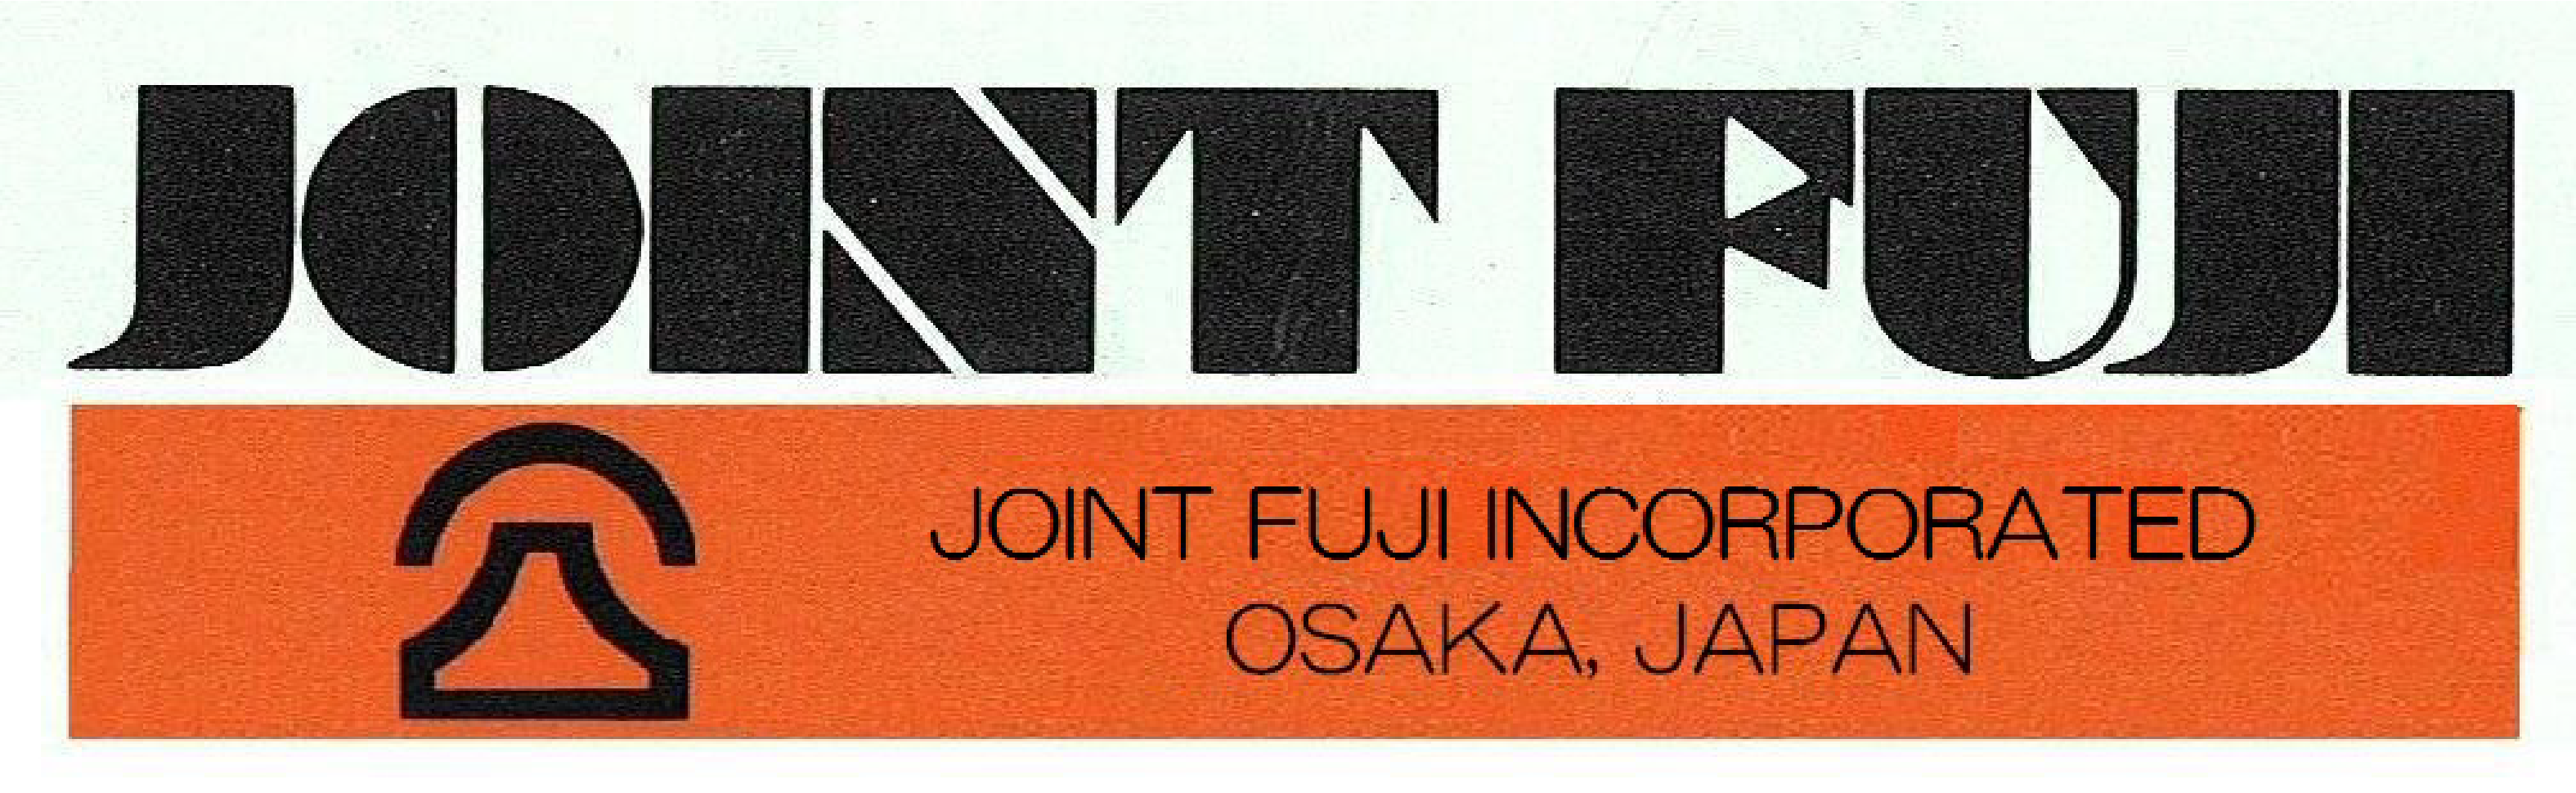 JOINT FUJI INCORPORATED